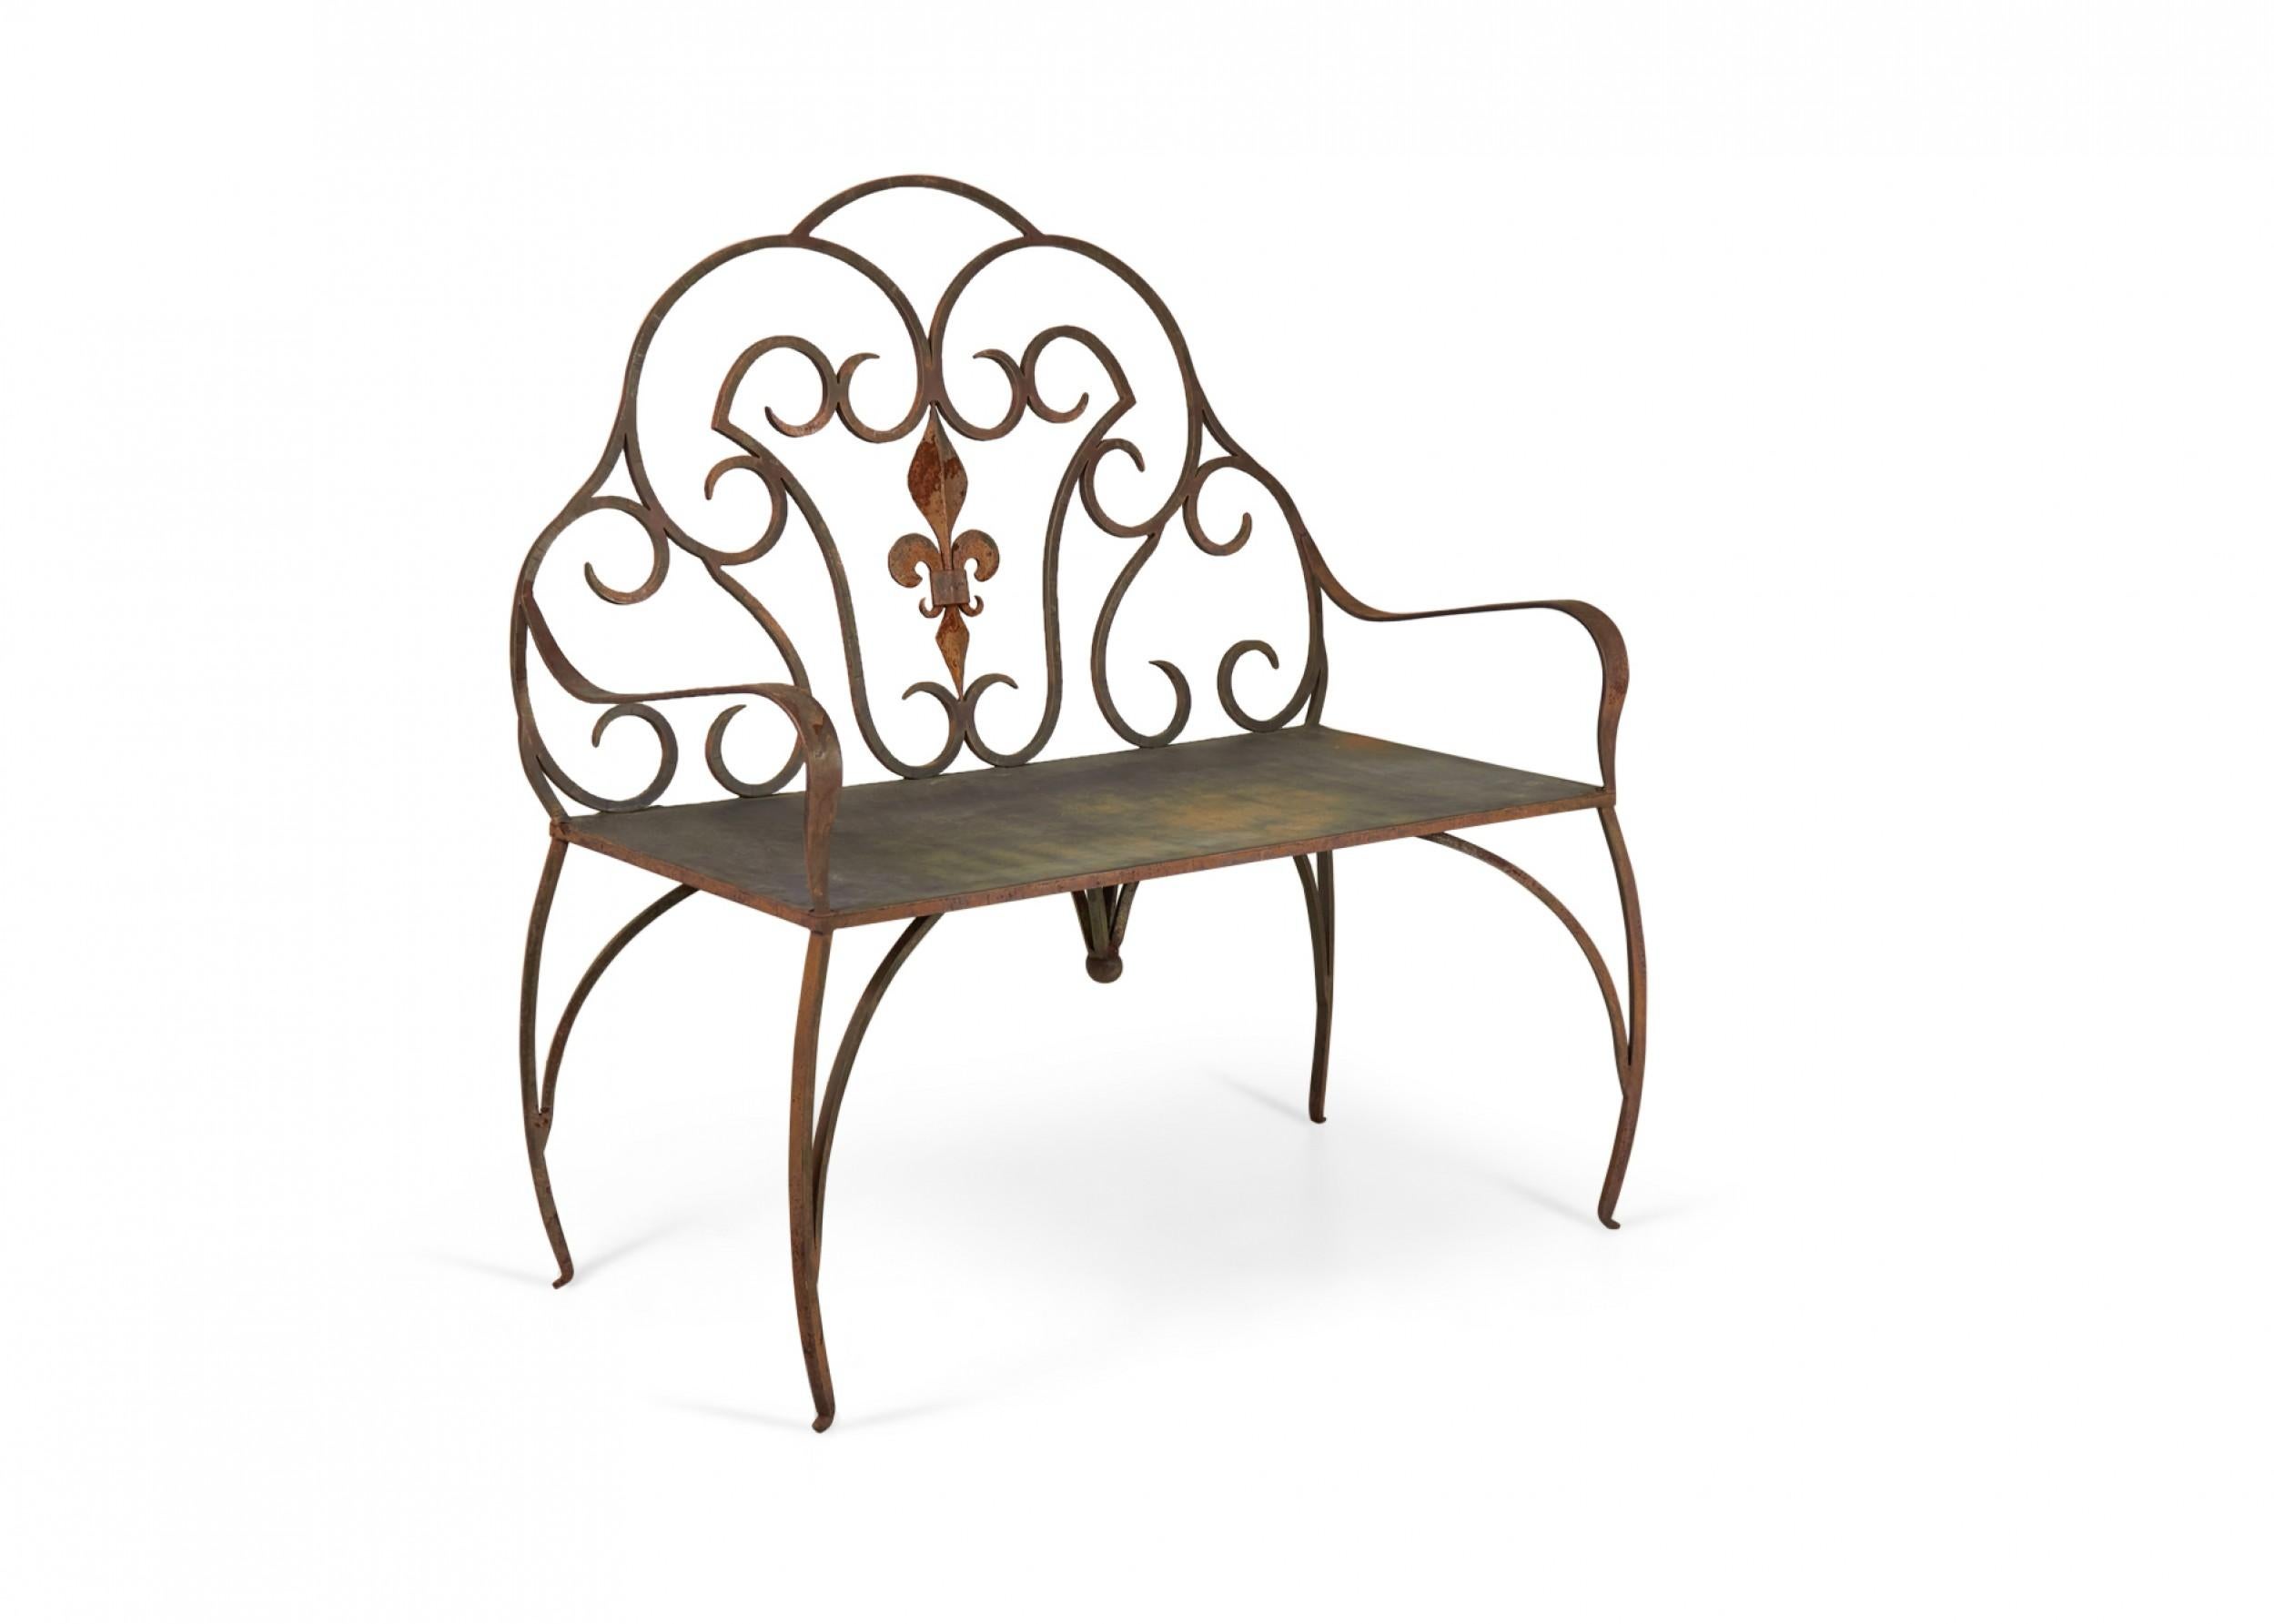 Jan Barboglio Mexican Modern Style Wrought Iron Outdoor Fleur de Lis Crest Bench For Sale 1